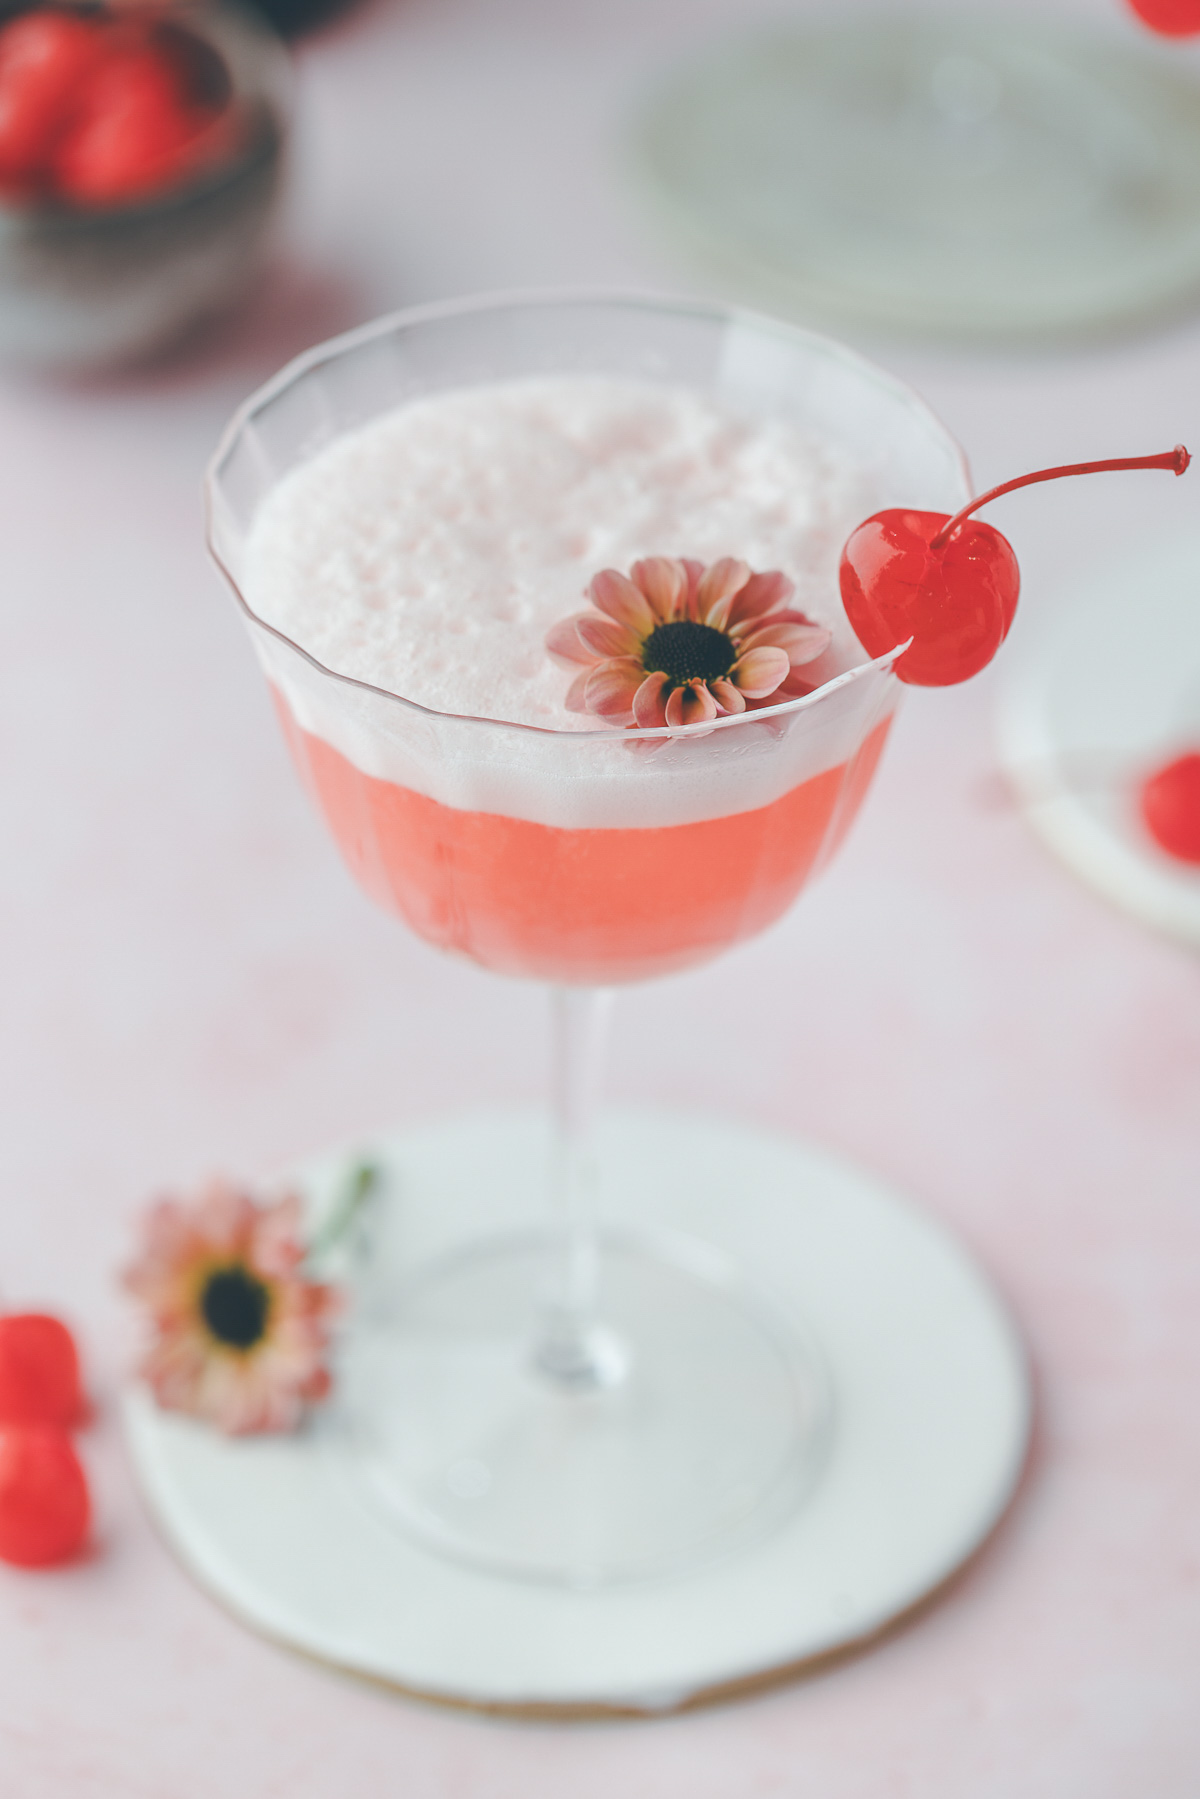 One pink lady cocktail garnished with a bright red cherry and an edible flower.